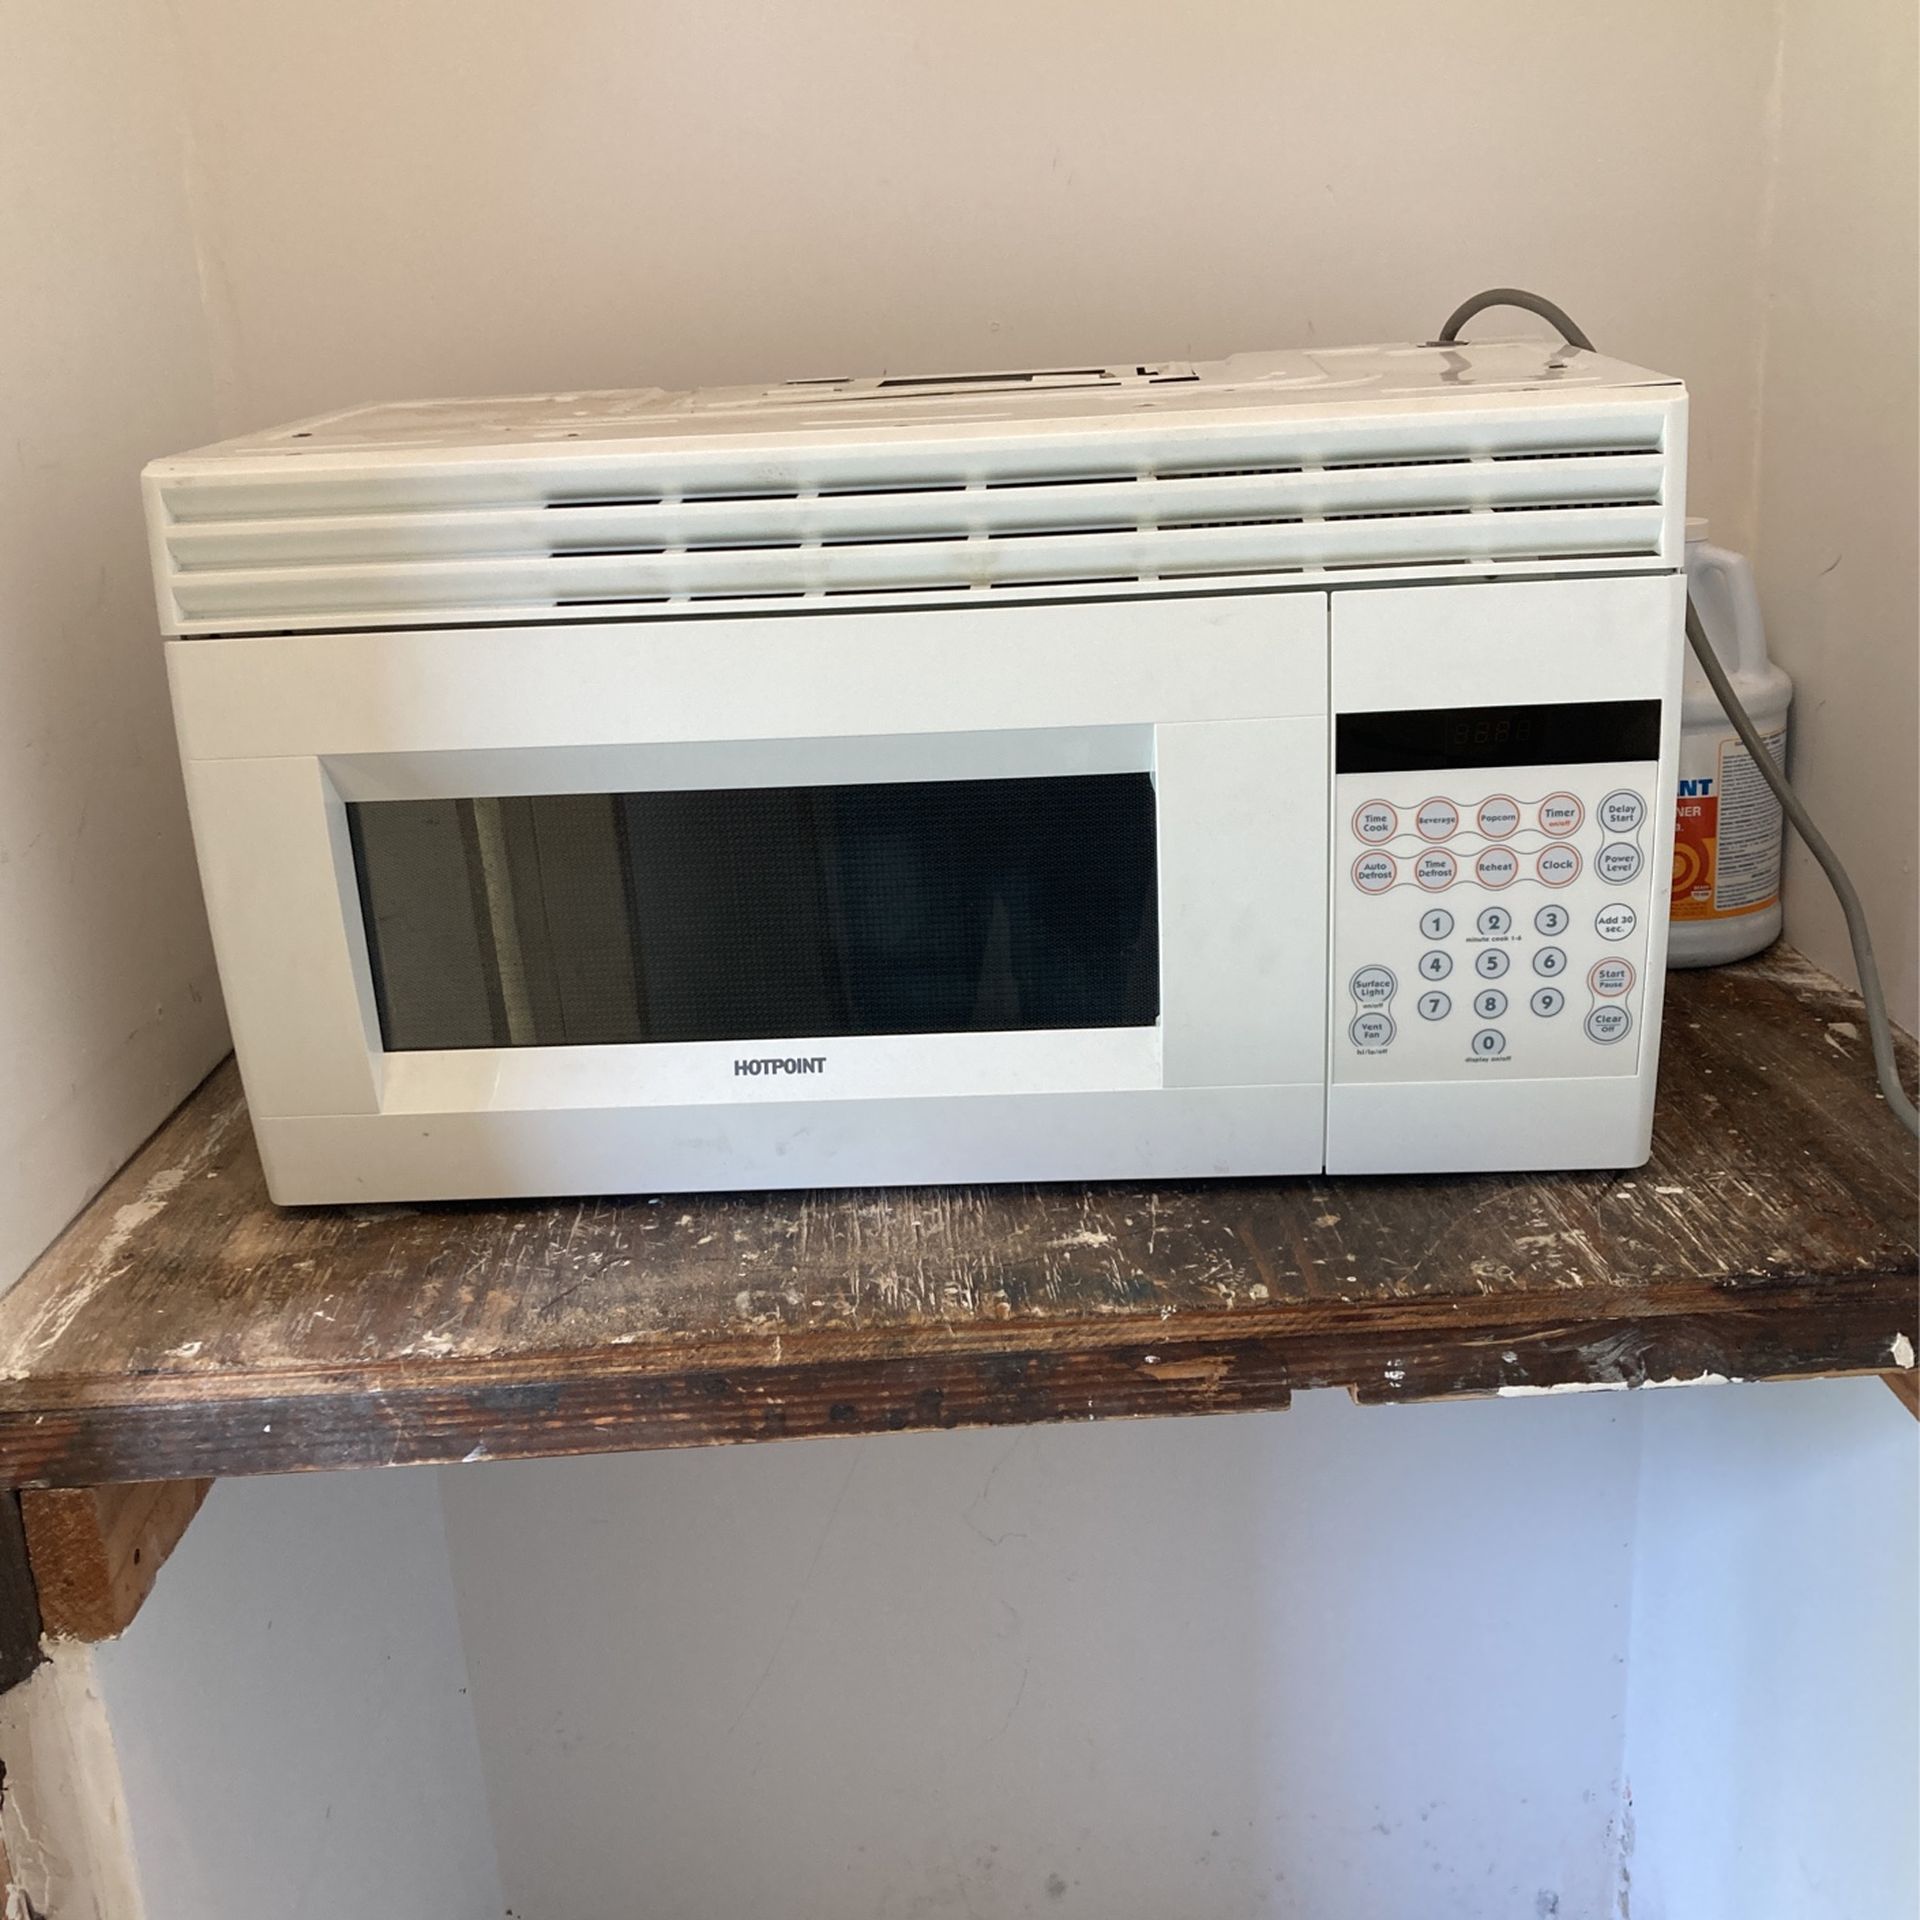 Microwave, Large Capacity and like new!